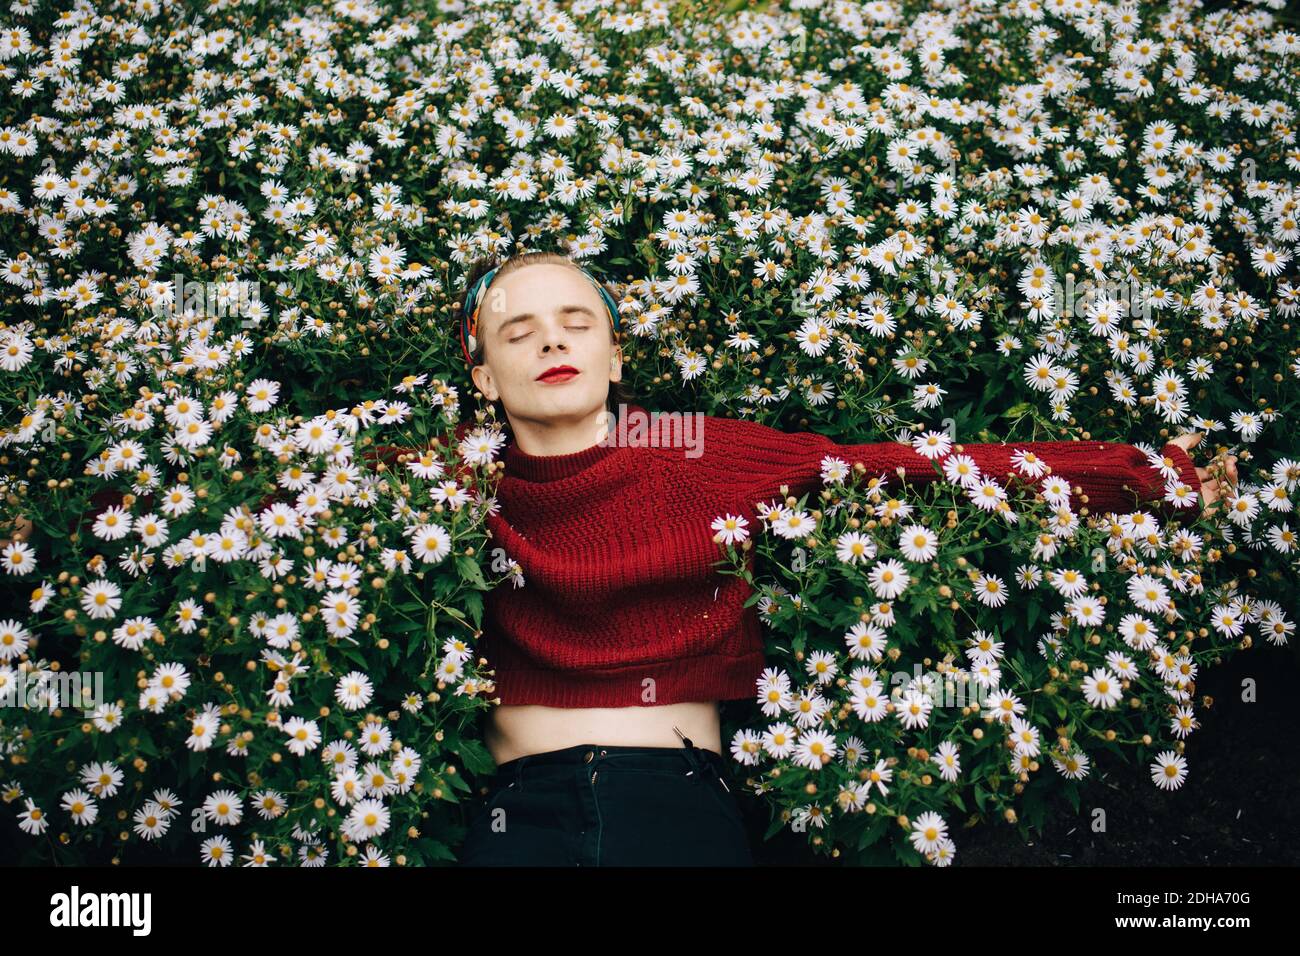 Contemplating man wearing red lipstick sleeping amidst daisy flowering plants Stock Photo